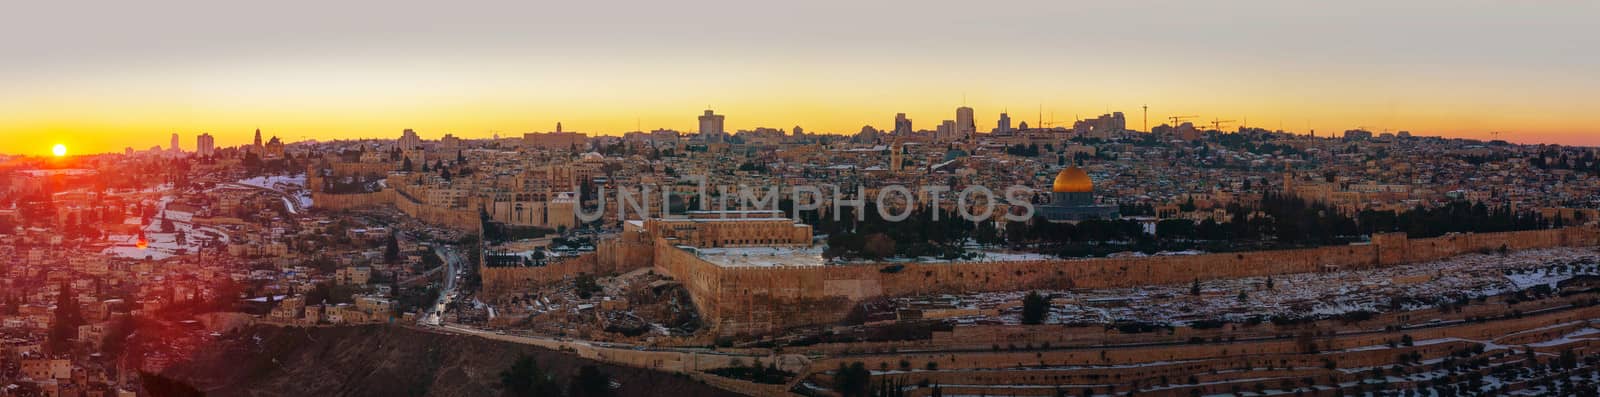 Overview of Old City in Jerusalem, Israel by AndreyKr